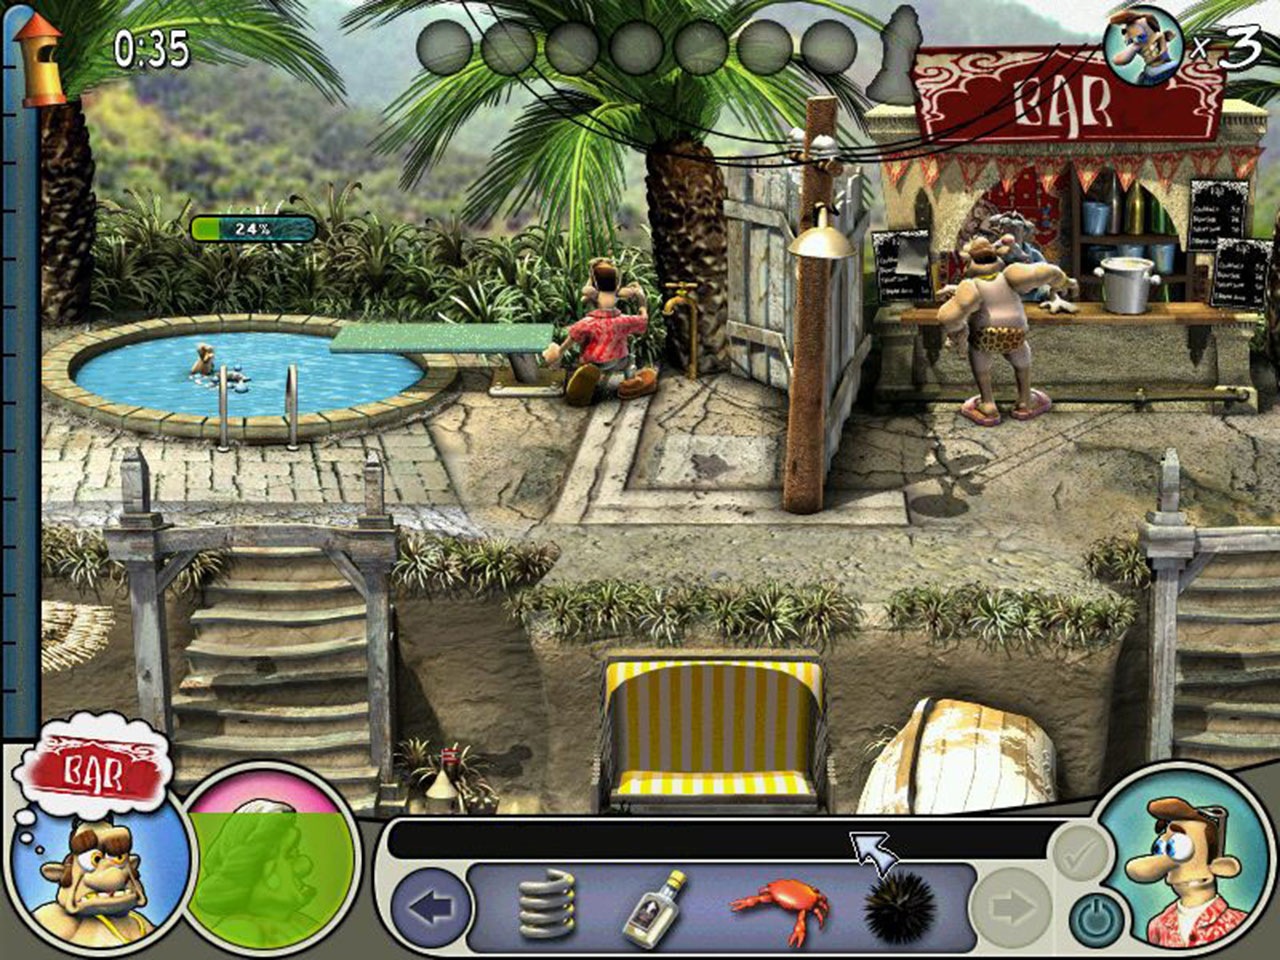 neighbours from hell free download for pc